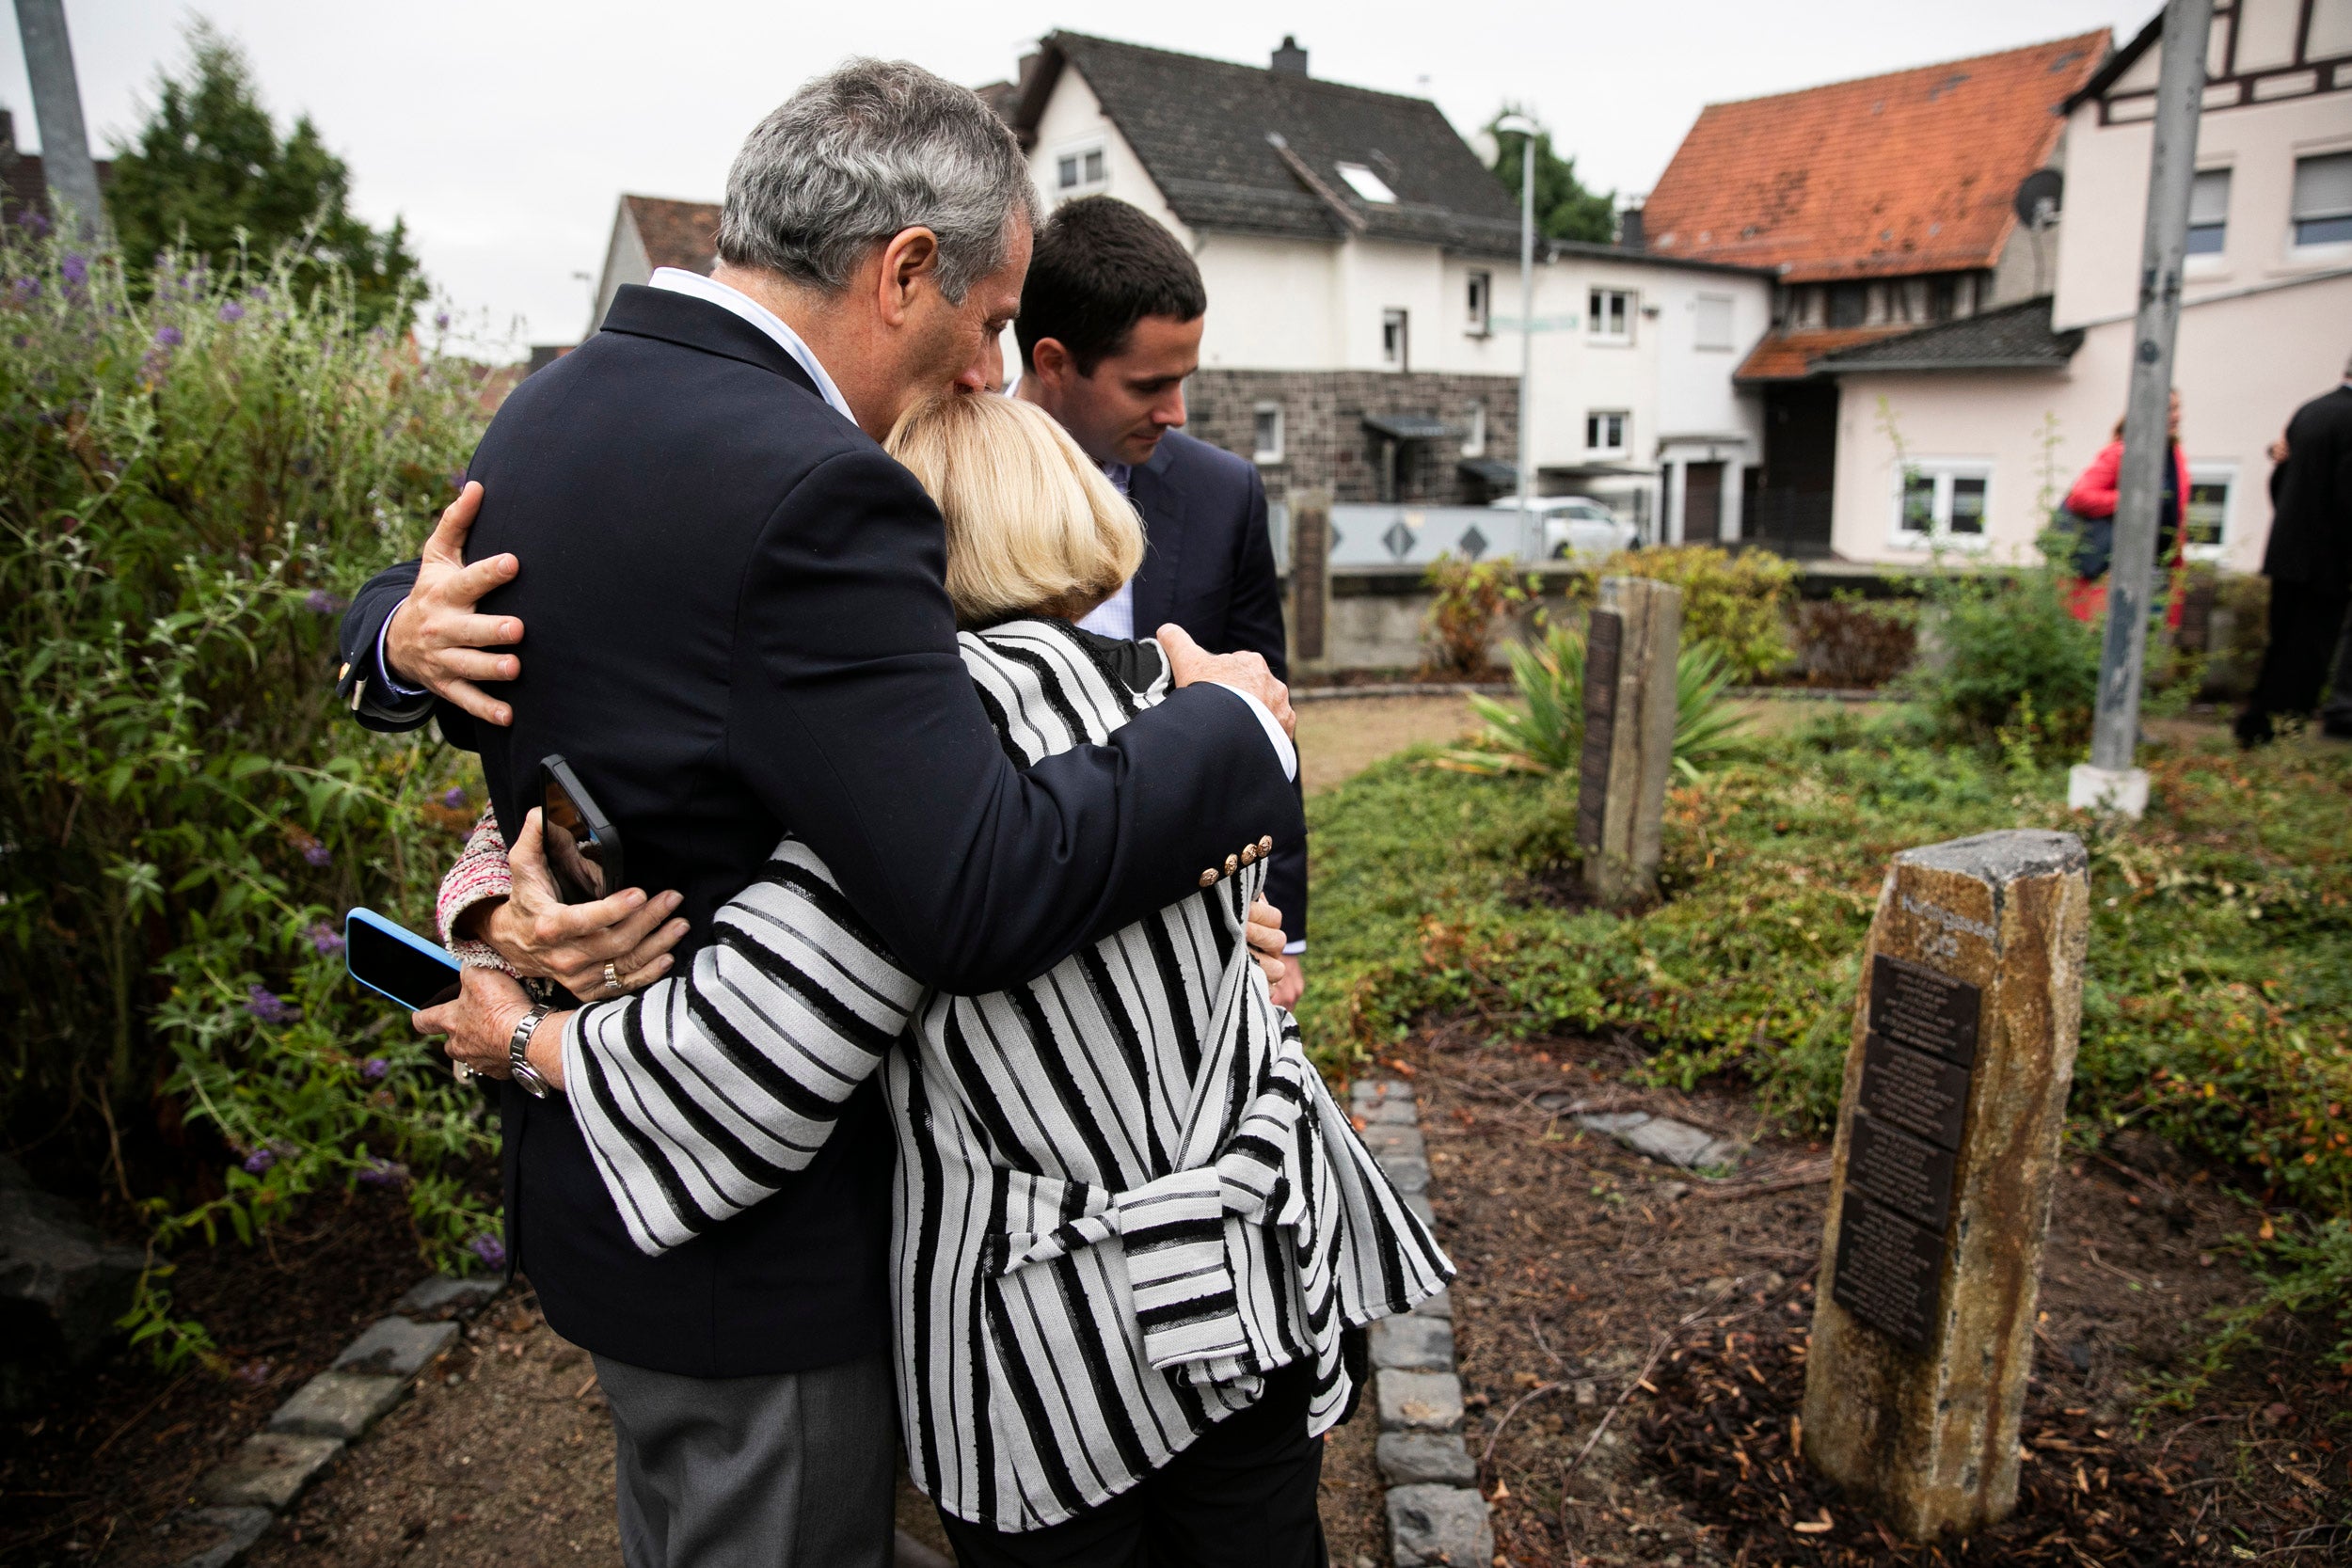 When Londorf, Germany, unveiled a Holocaust memorial in September, Bacow and other descendants of Jewish citizens from the village attended.